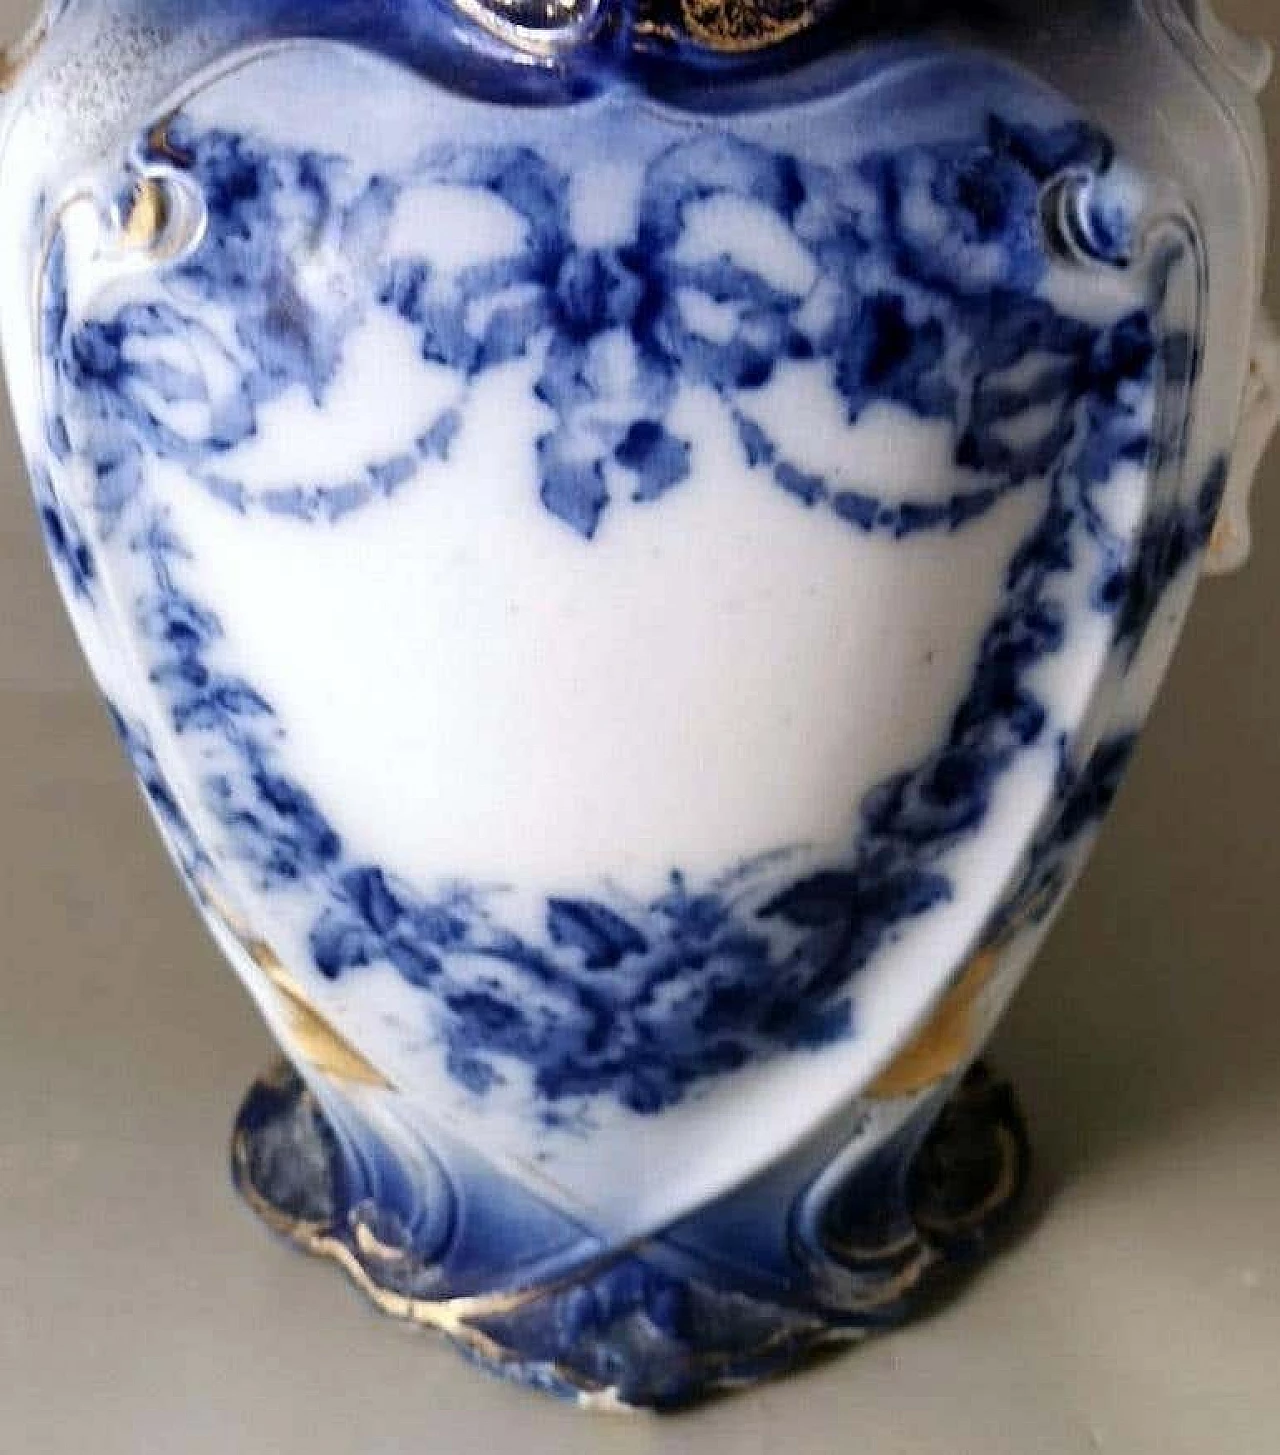 Victorian-style jug in white, blue and gold porcelain, late 19th century 8